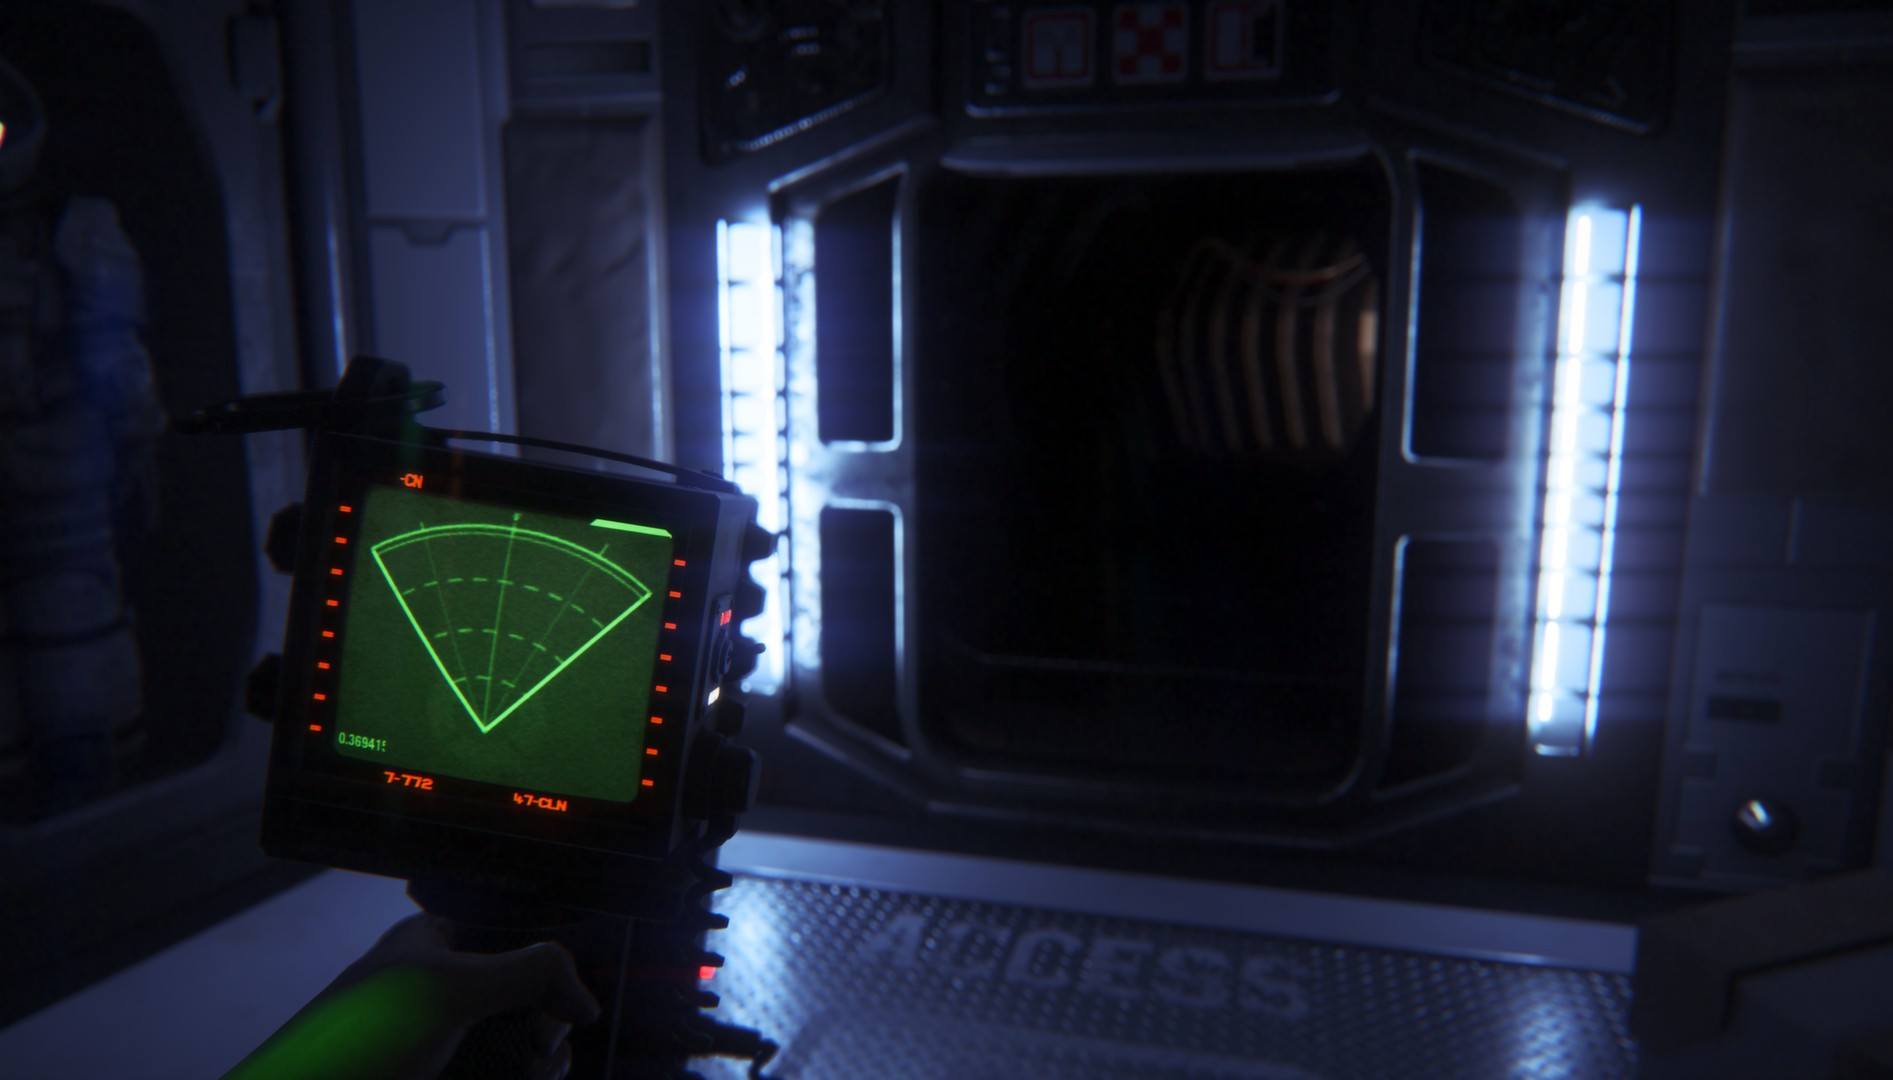 Alien: Isolation is Coming to Android - Here’s What we Know About the Release Date and Other Info